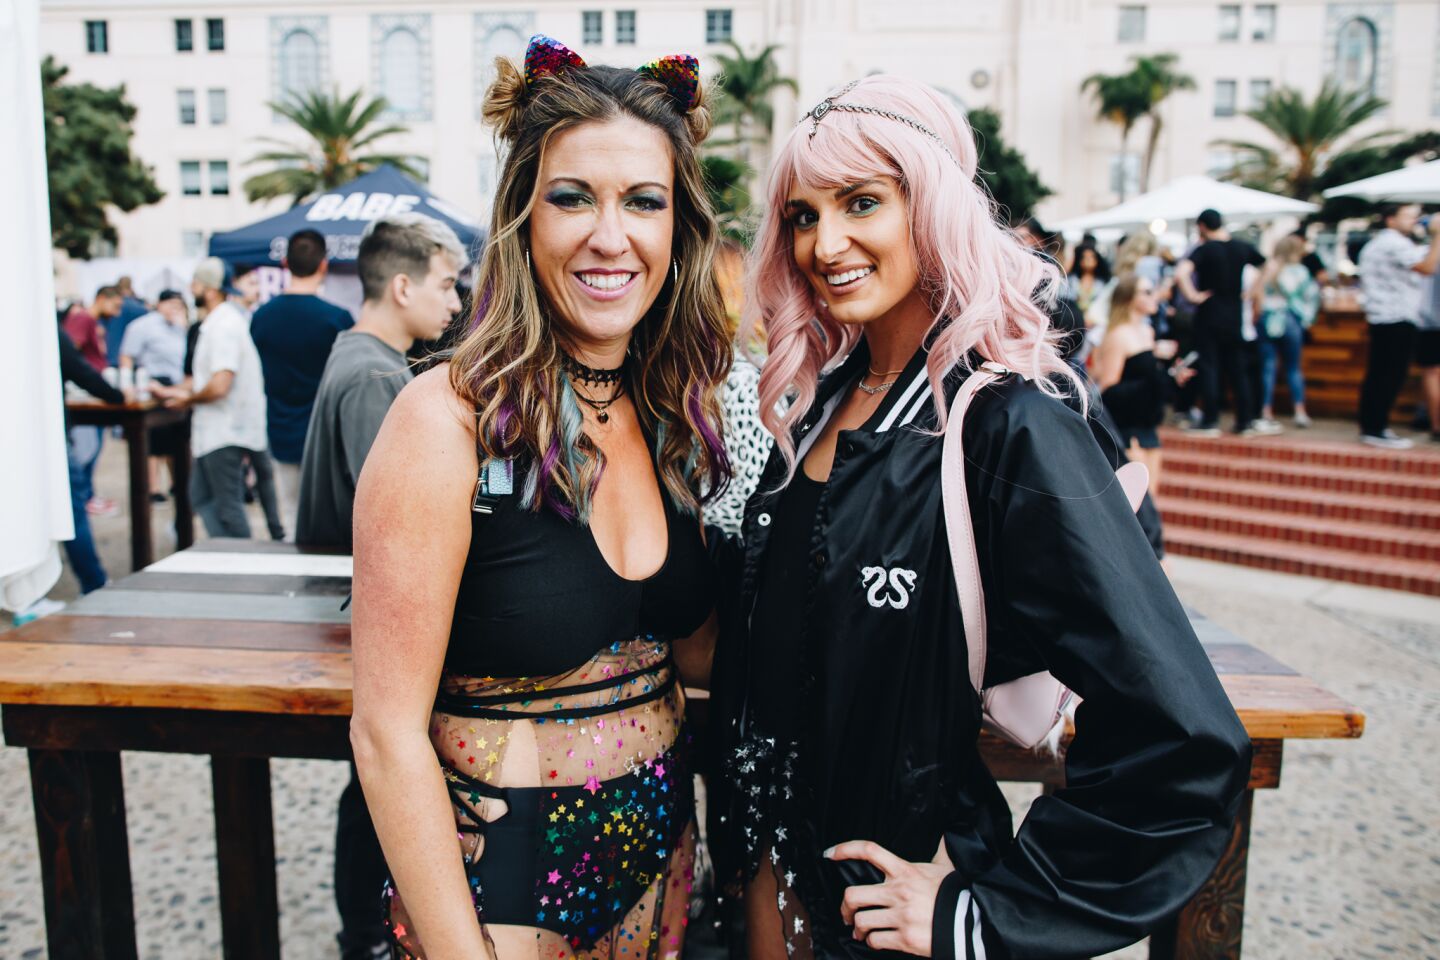 Day One of CRSSD Fest